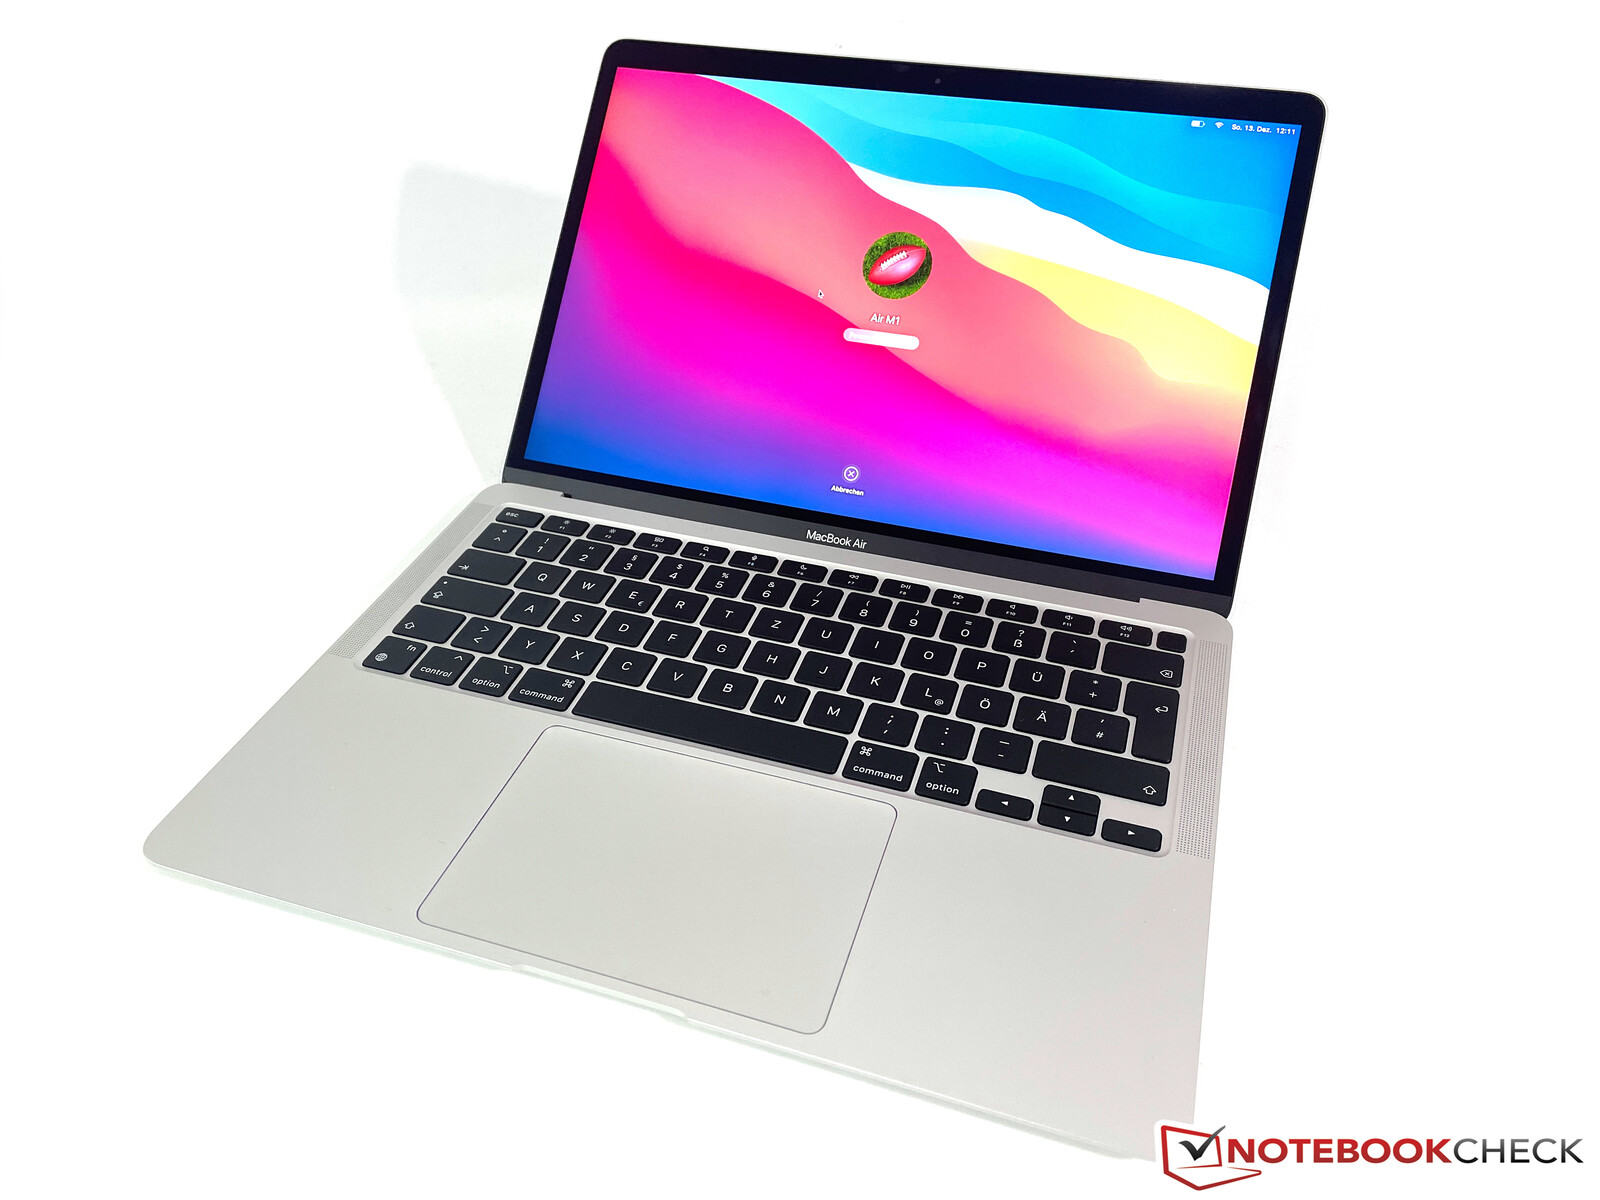 Apple MacBook Air 2020 Review: Should you get the more powerful 